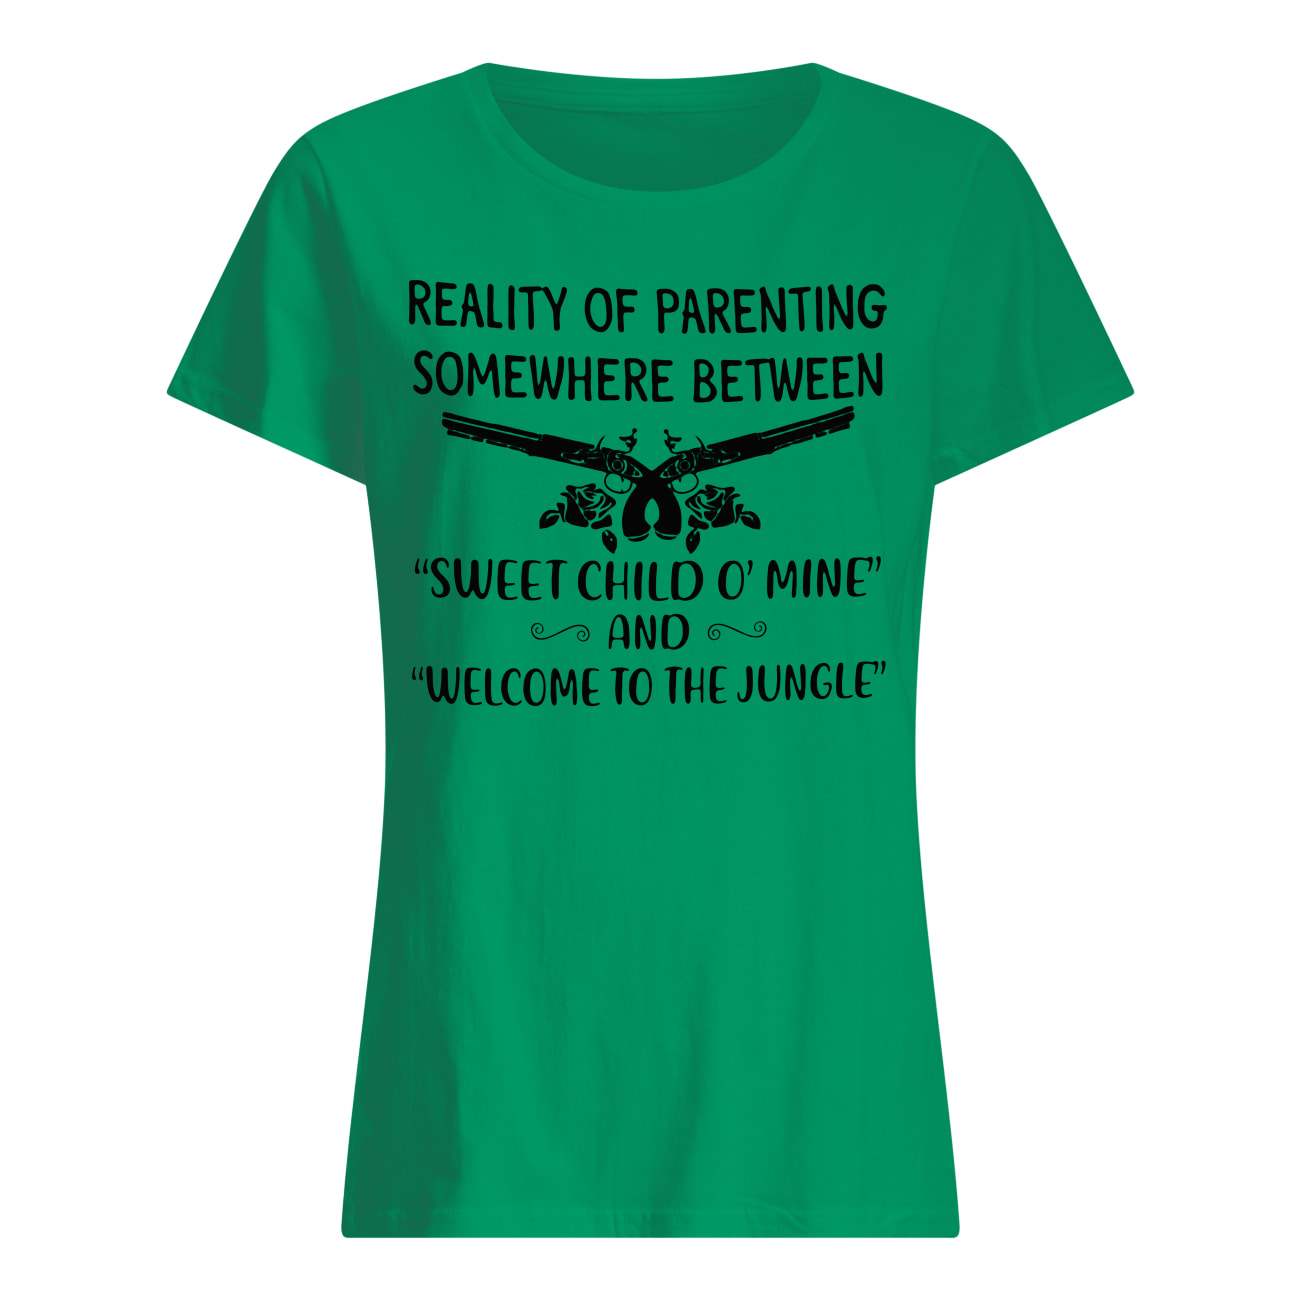 Reality of parenting somewhere between sweet child o' mine and welcome to the jungle women's shirt